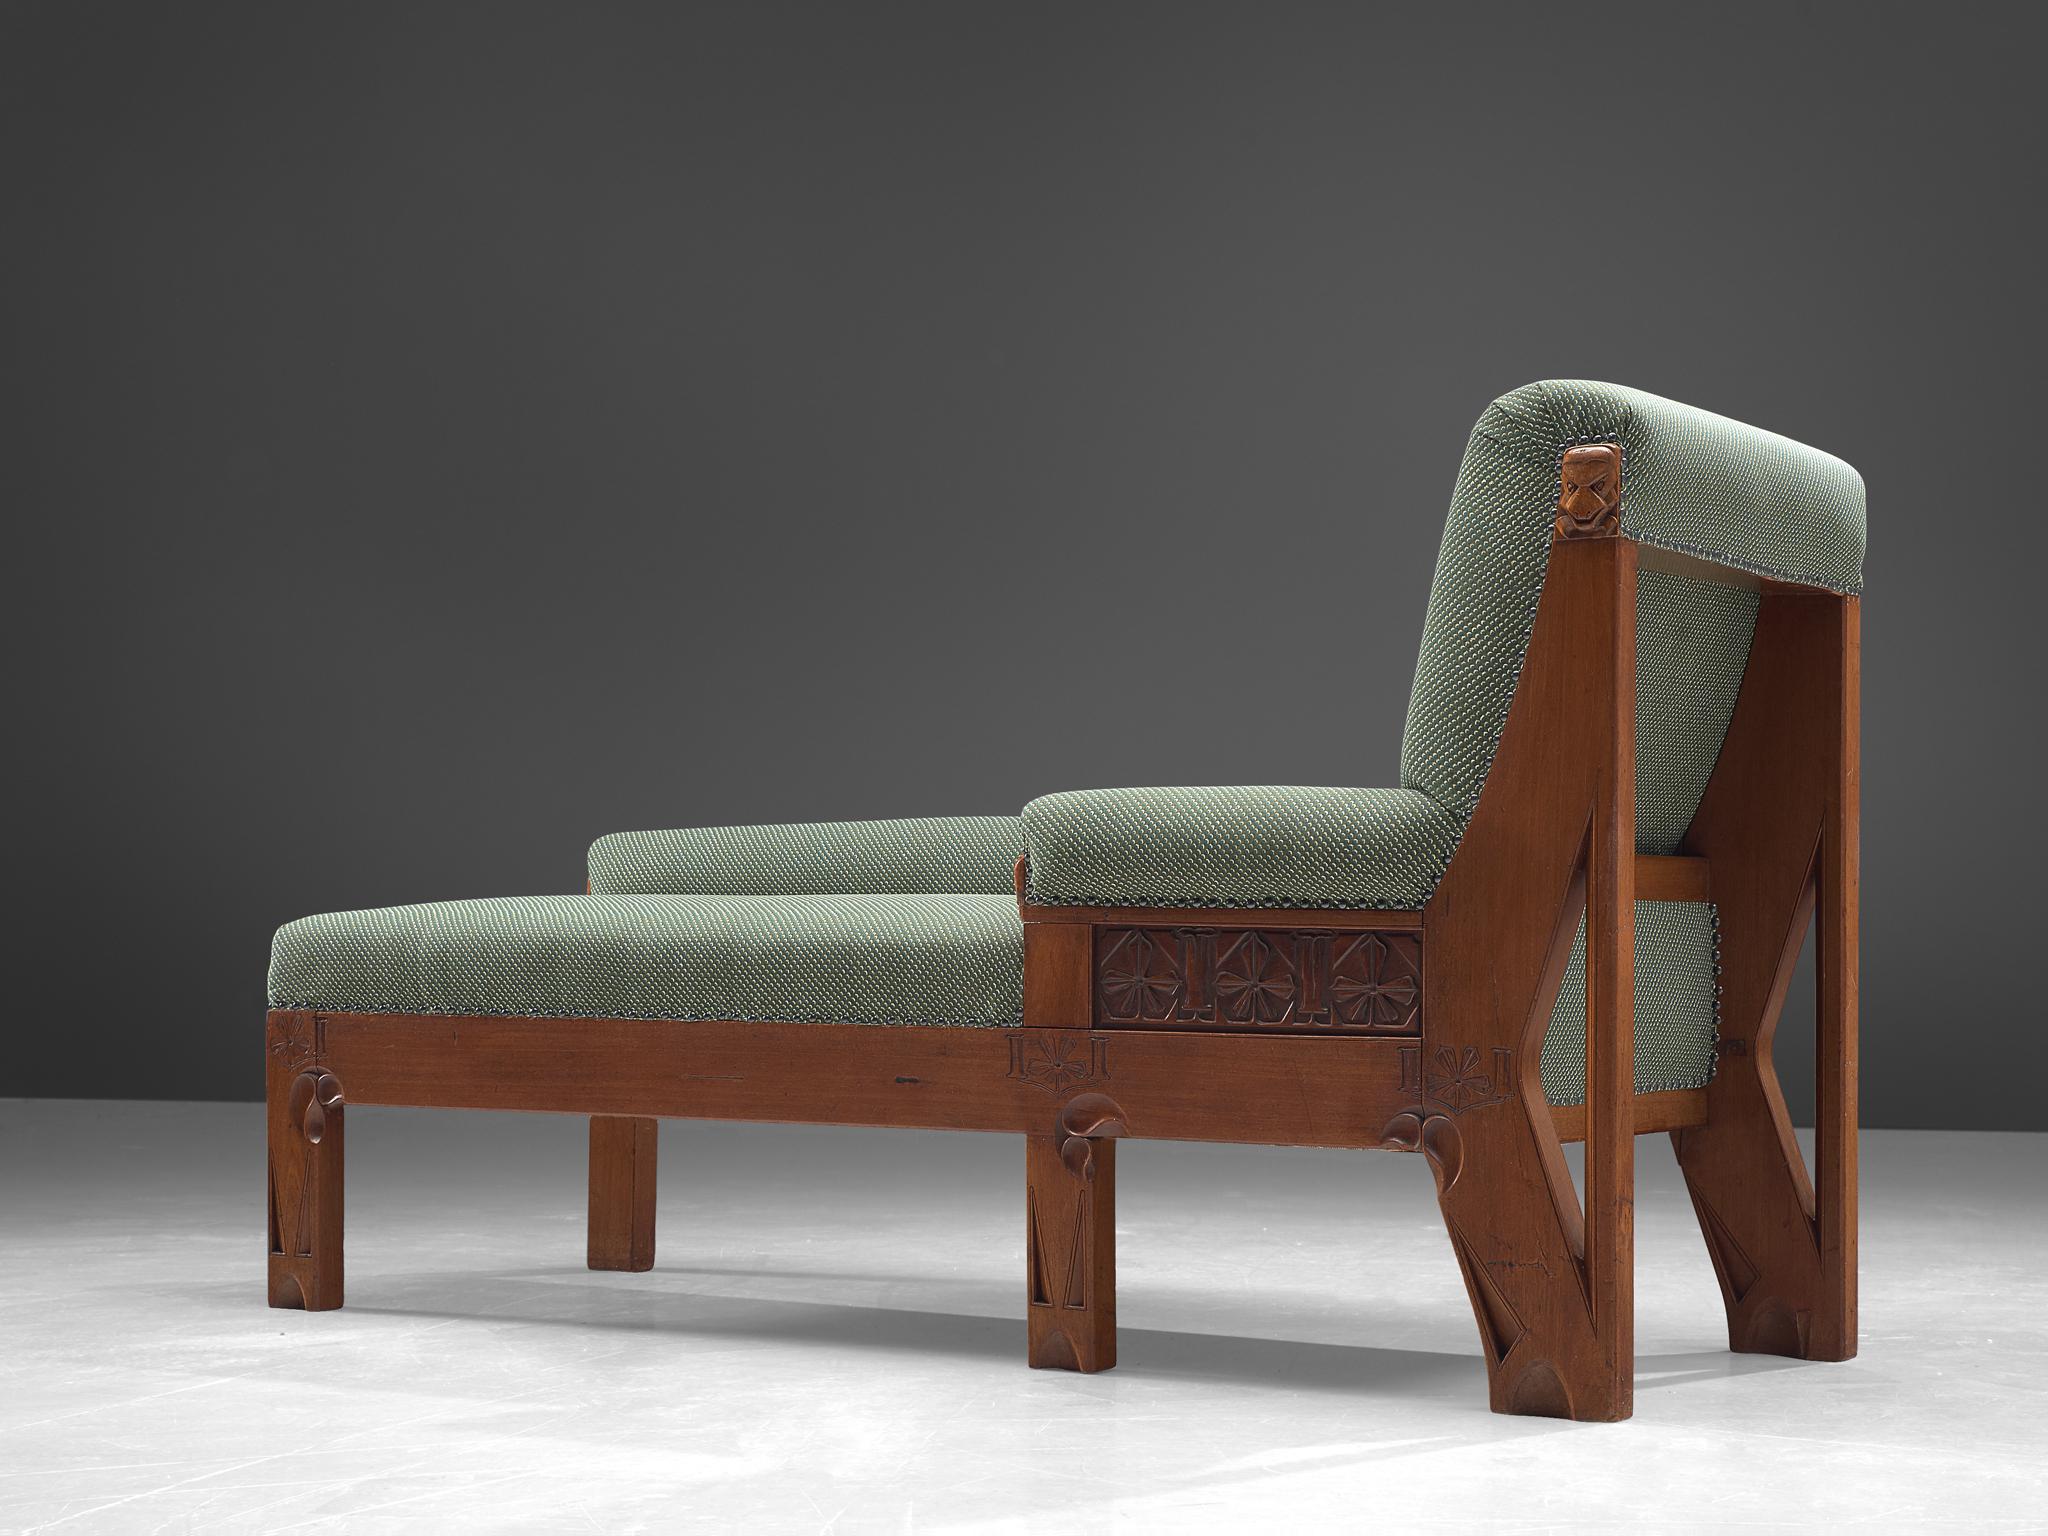 Mid-20th Century Early Dutch Chaise Longue in ZAK+FOX 'Fantasma' Collection 2020 Upholstery